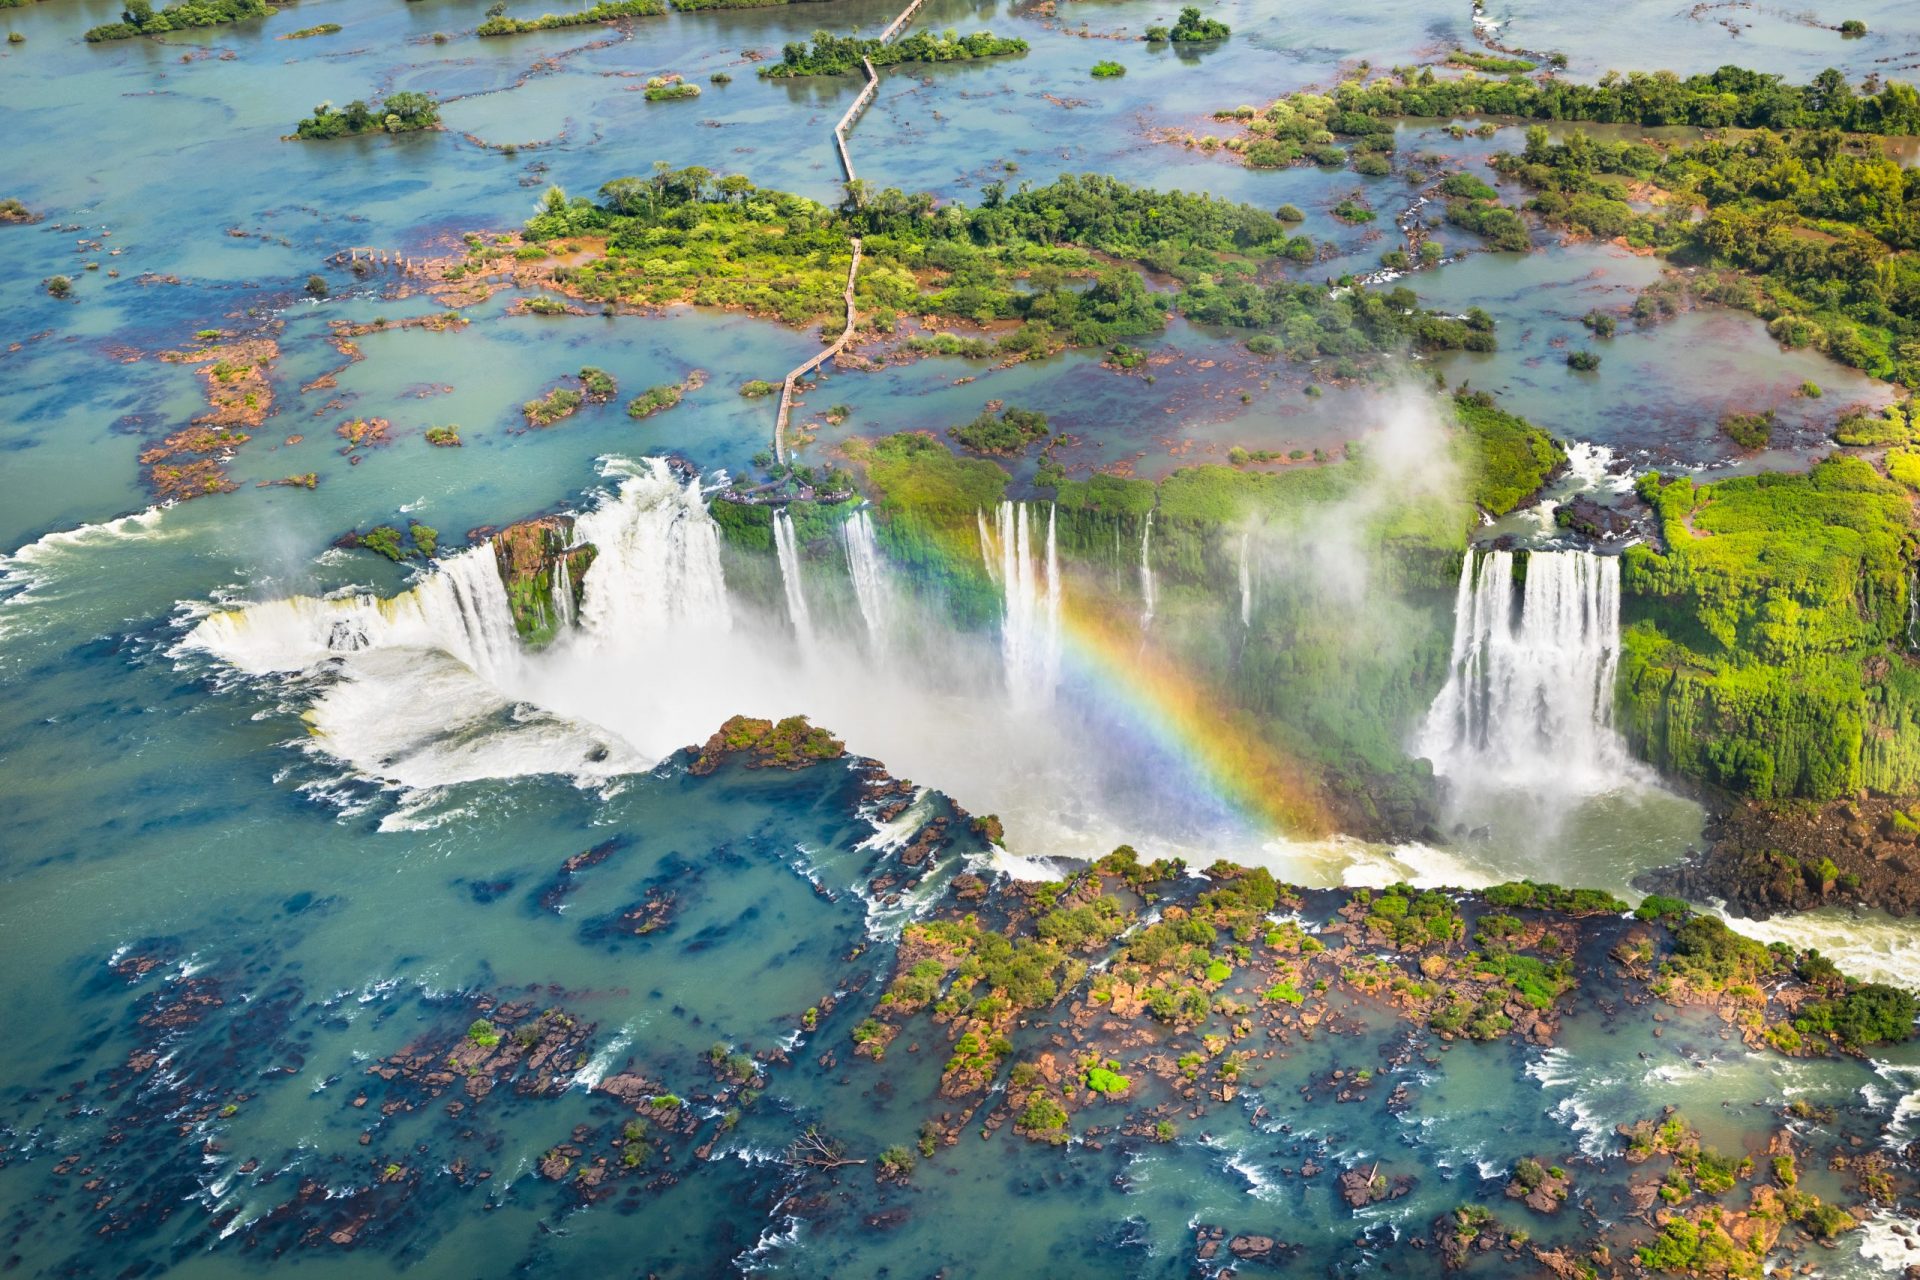 the Iguazu Falls is a series of 275 waterfalls huddled close together and f...